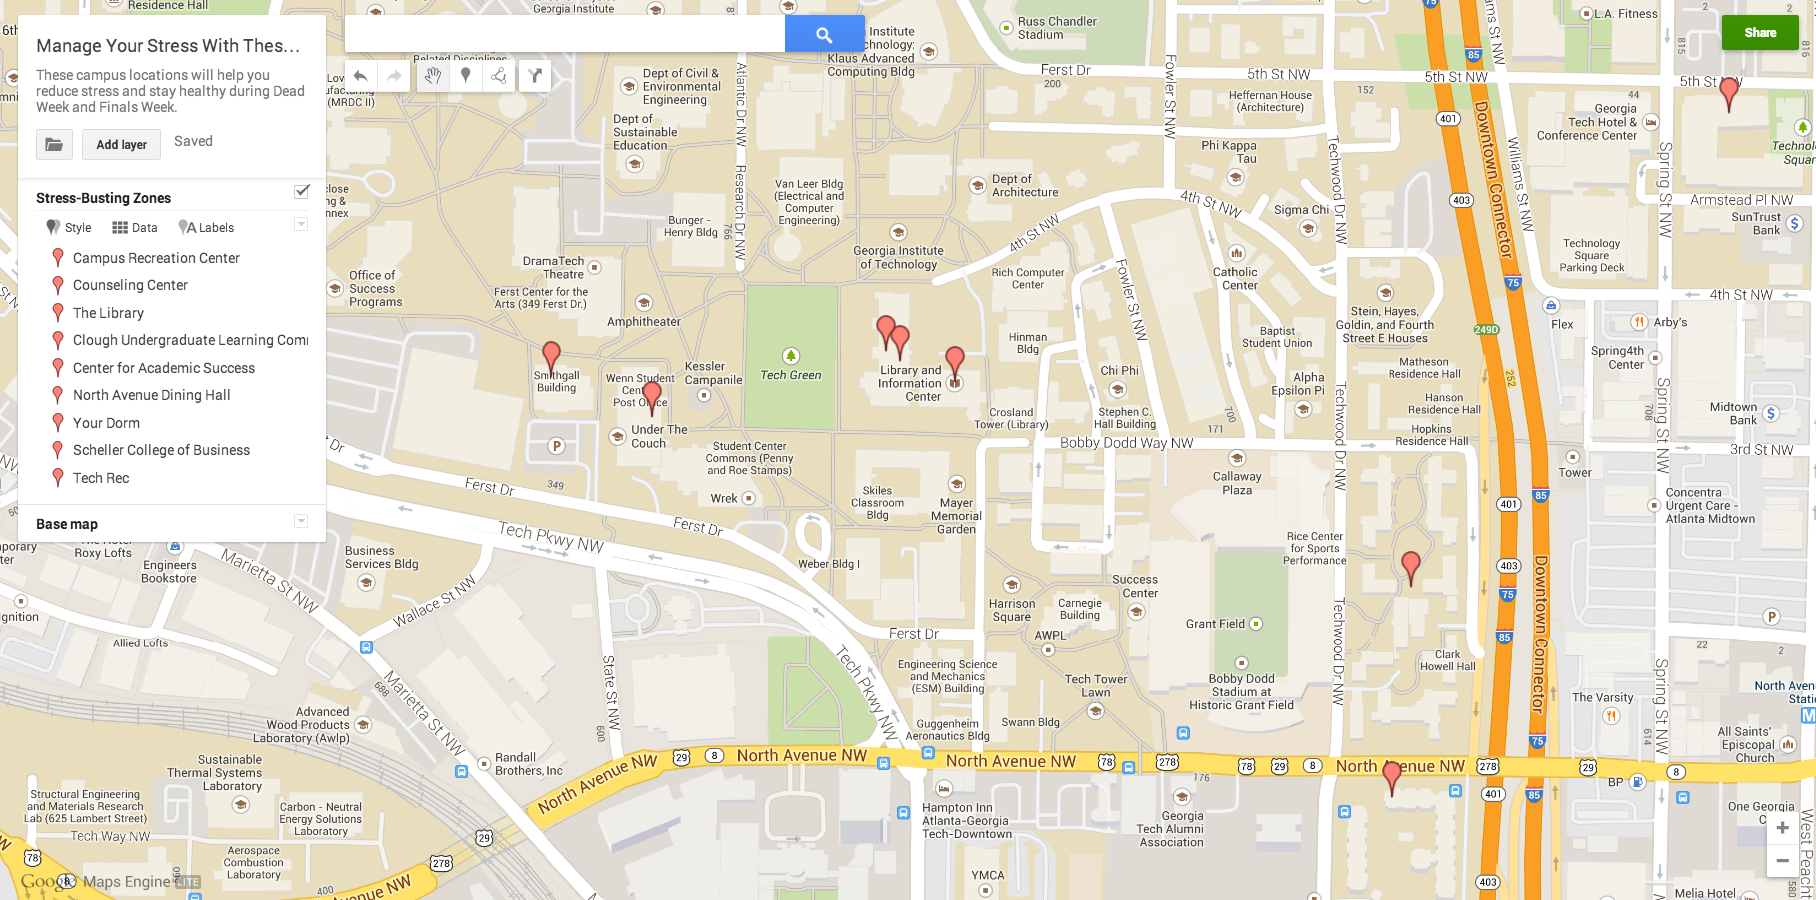 Check out this map of campus stress-busting zones.